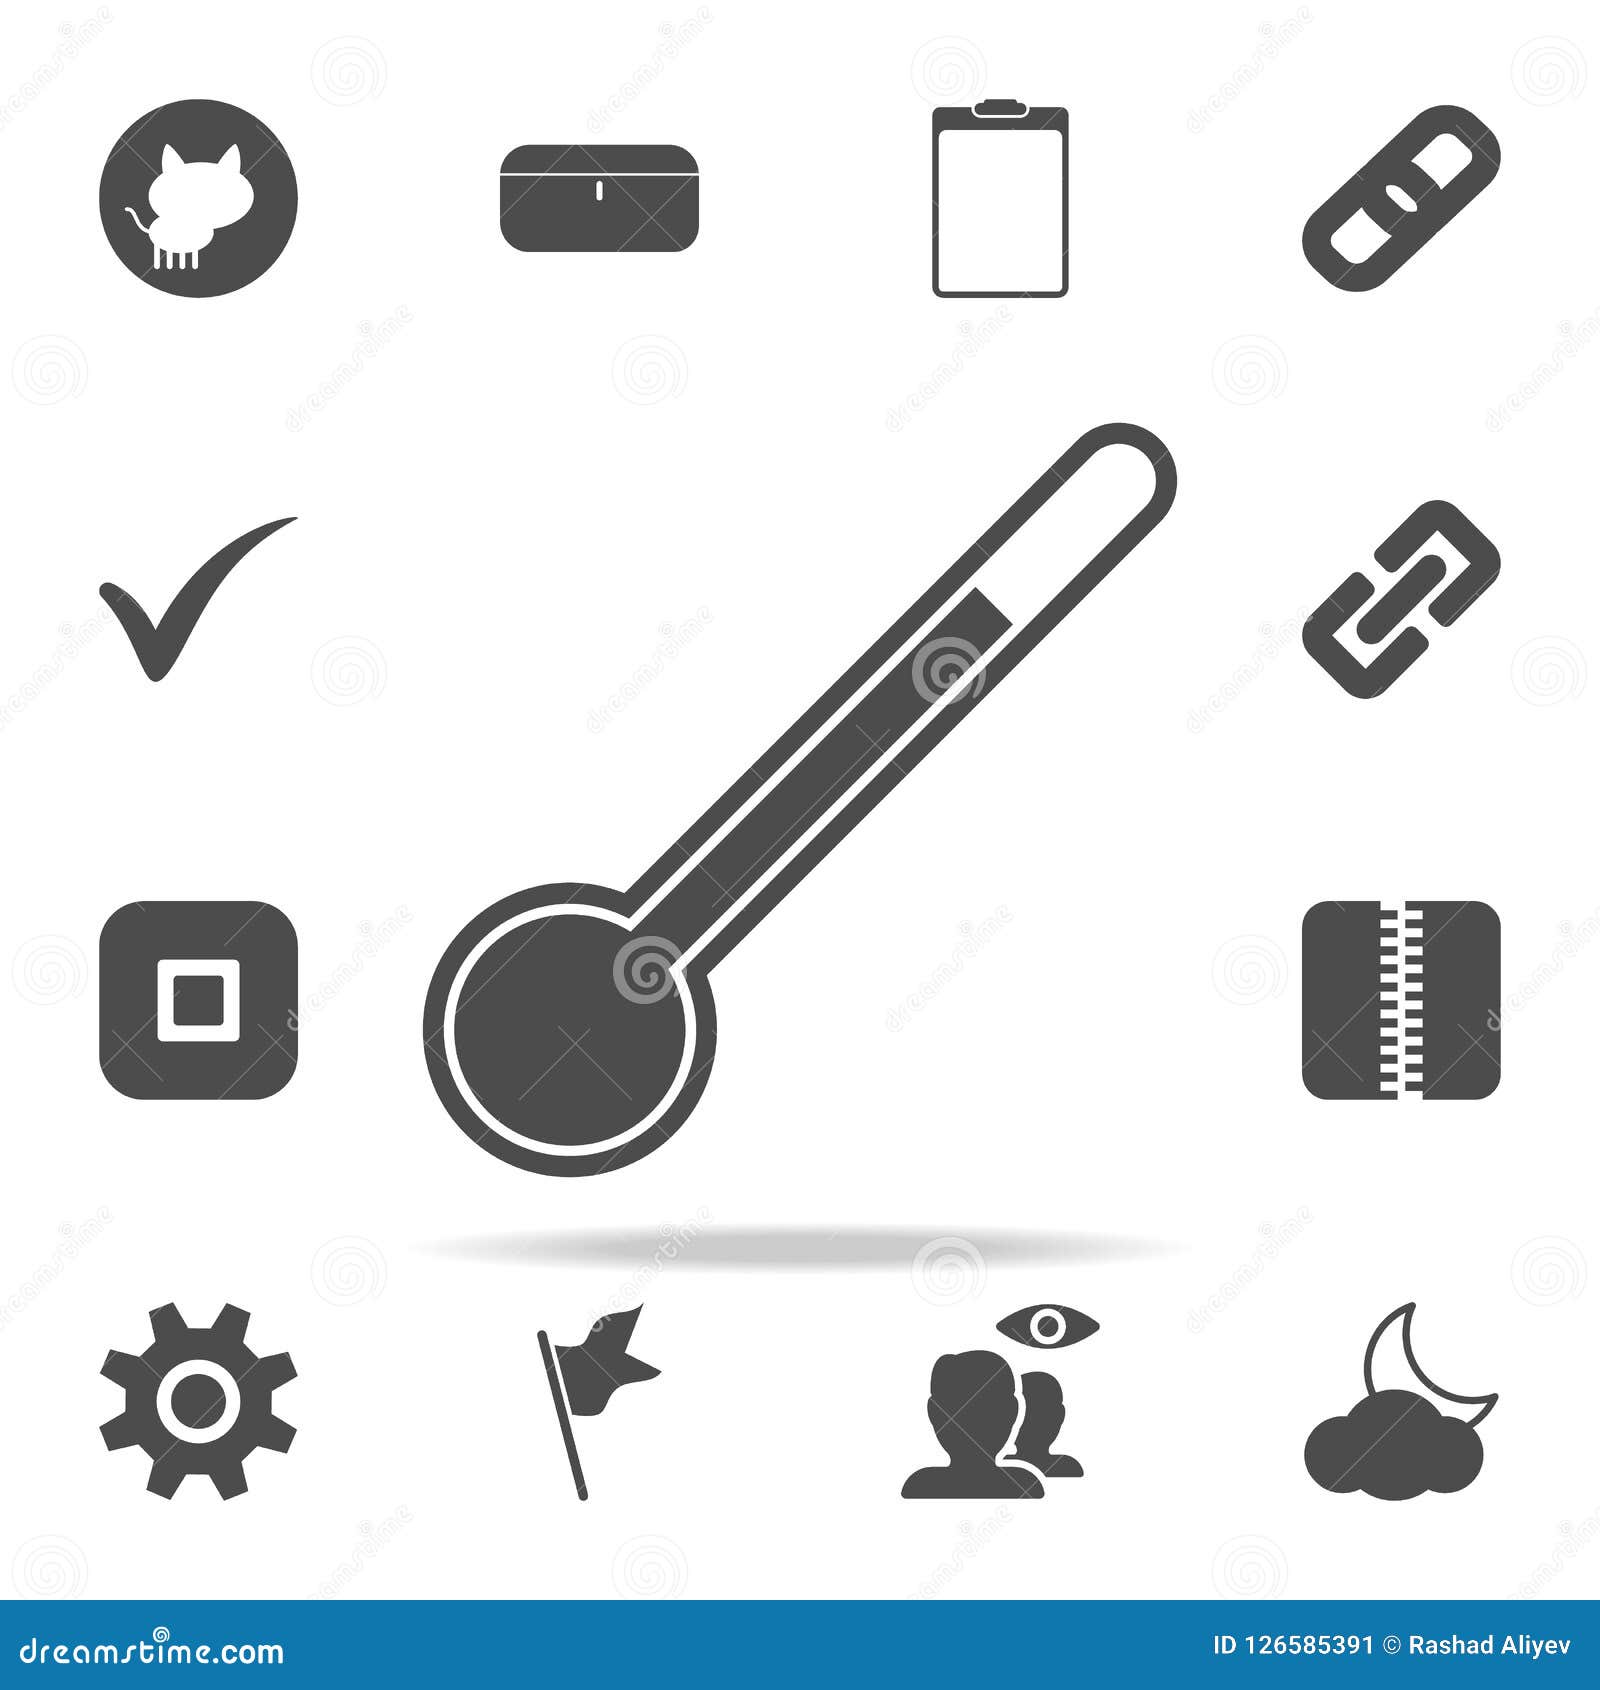 thermometry icon. web icons universal set for web and mobile